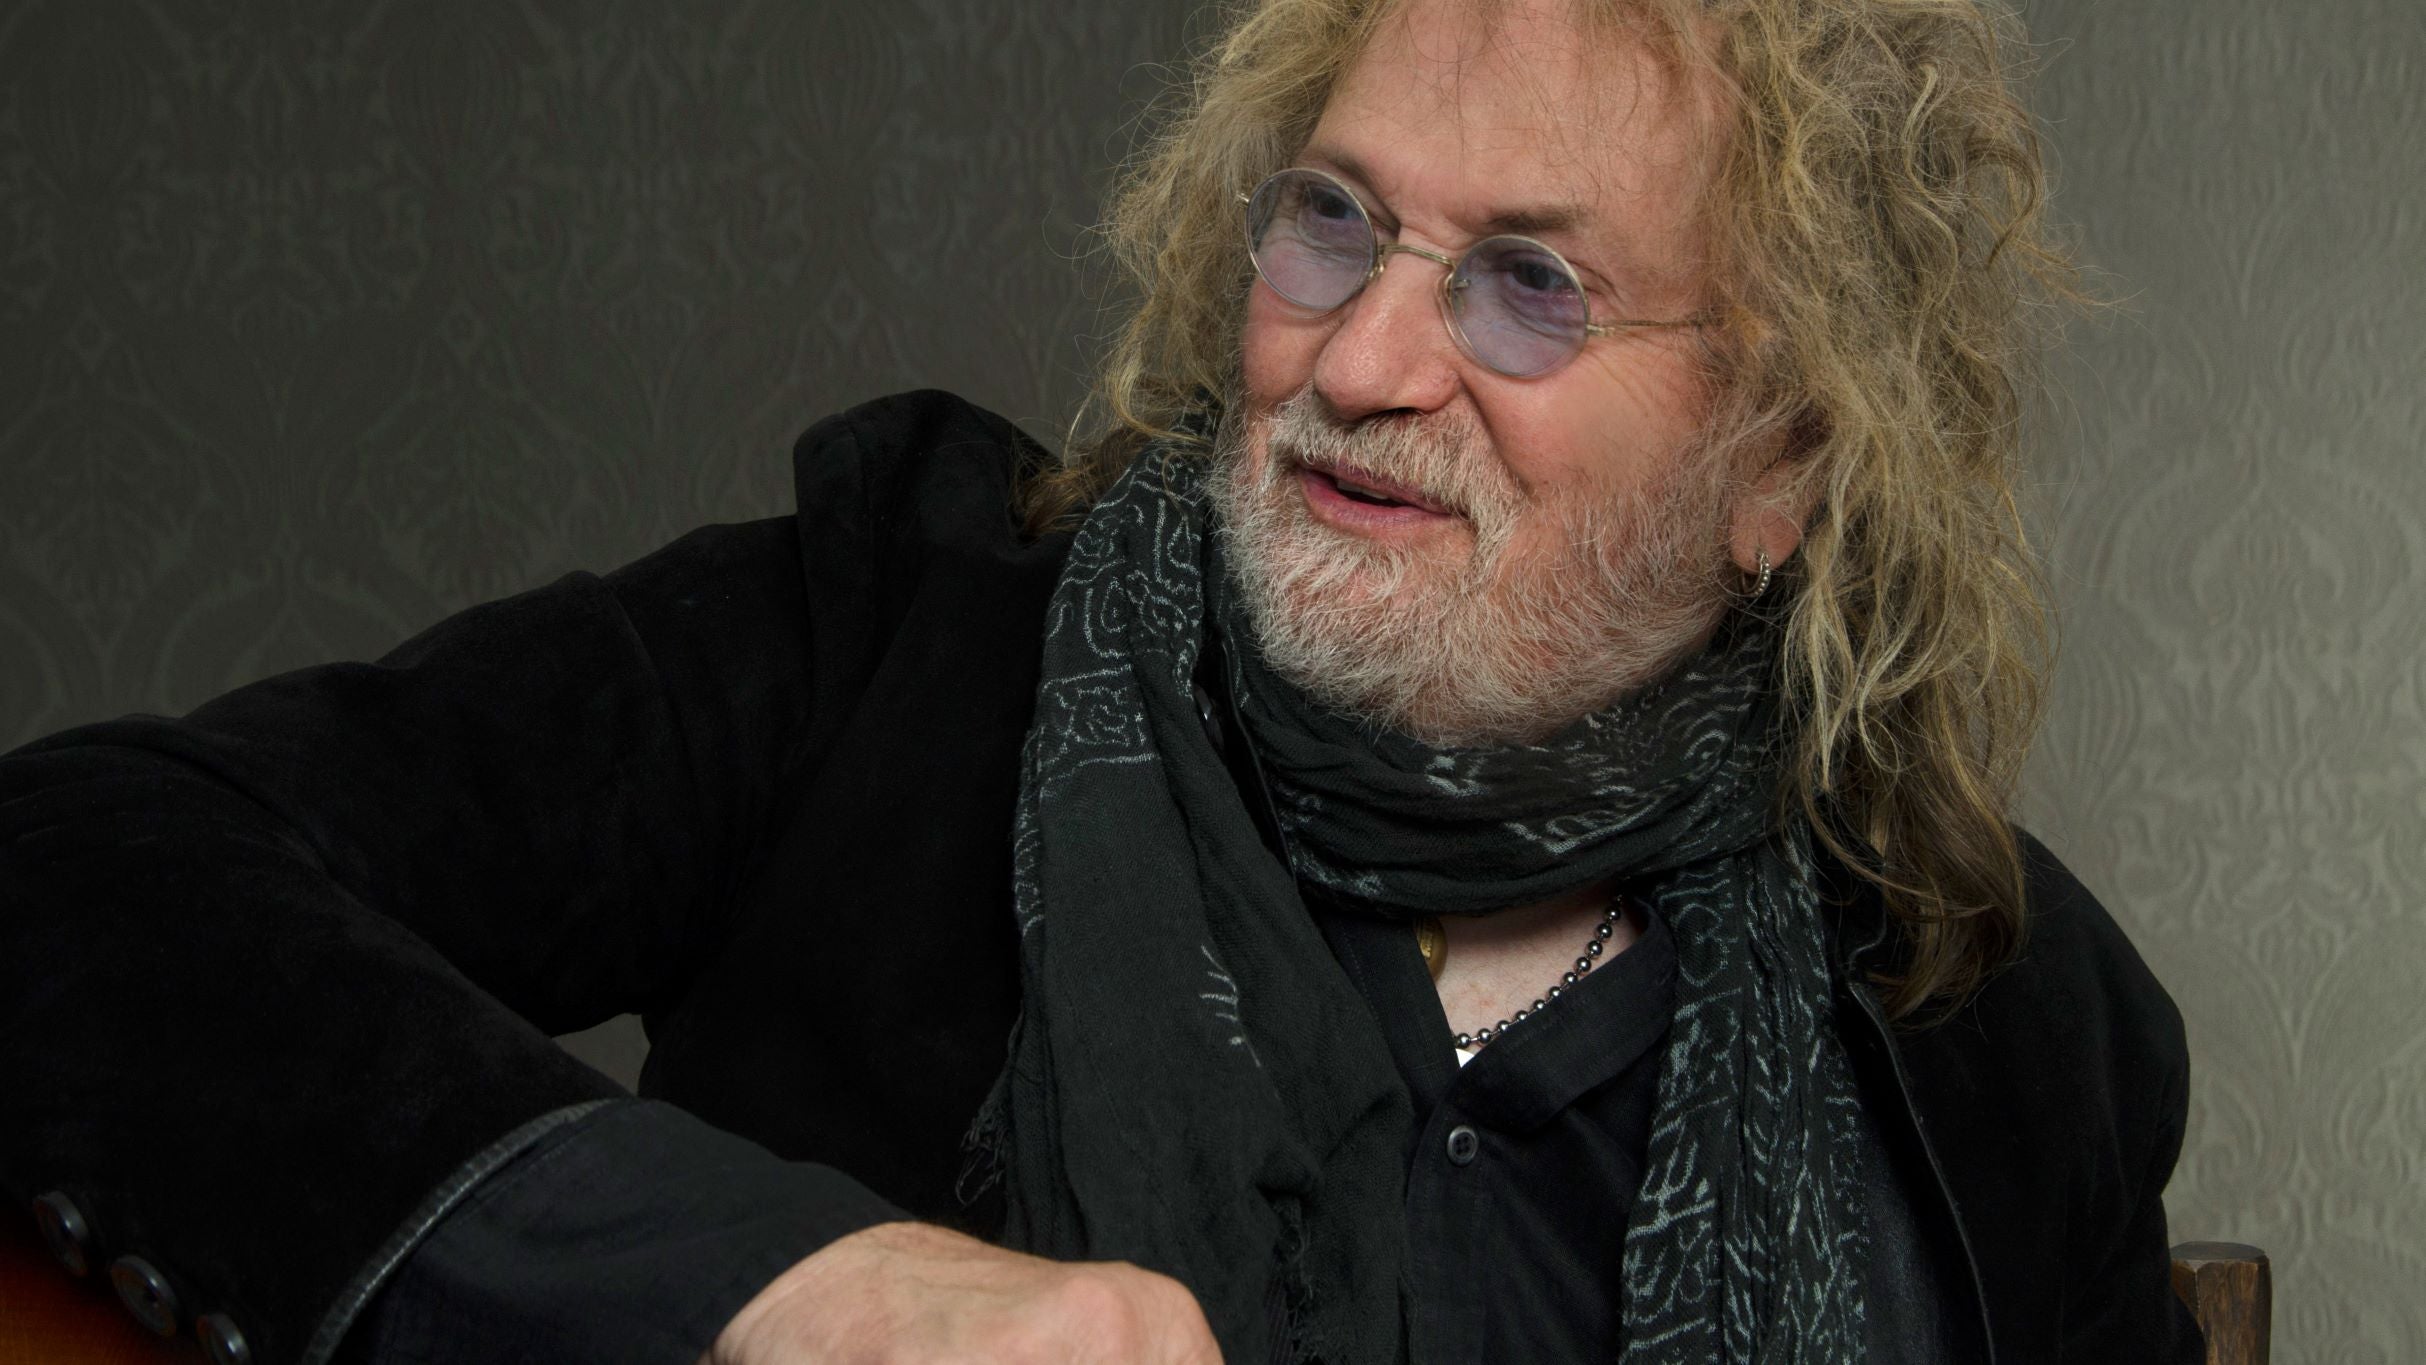 Ray Wylie Hubbard presale code for early tickets in Las Vegas